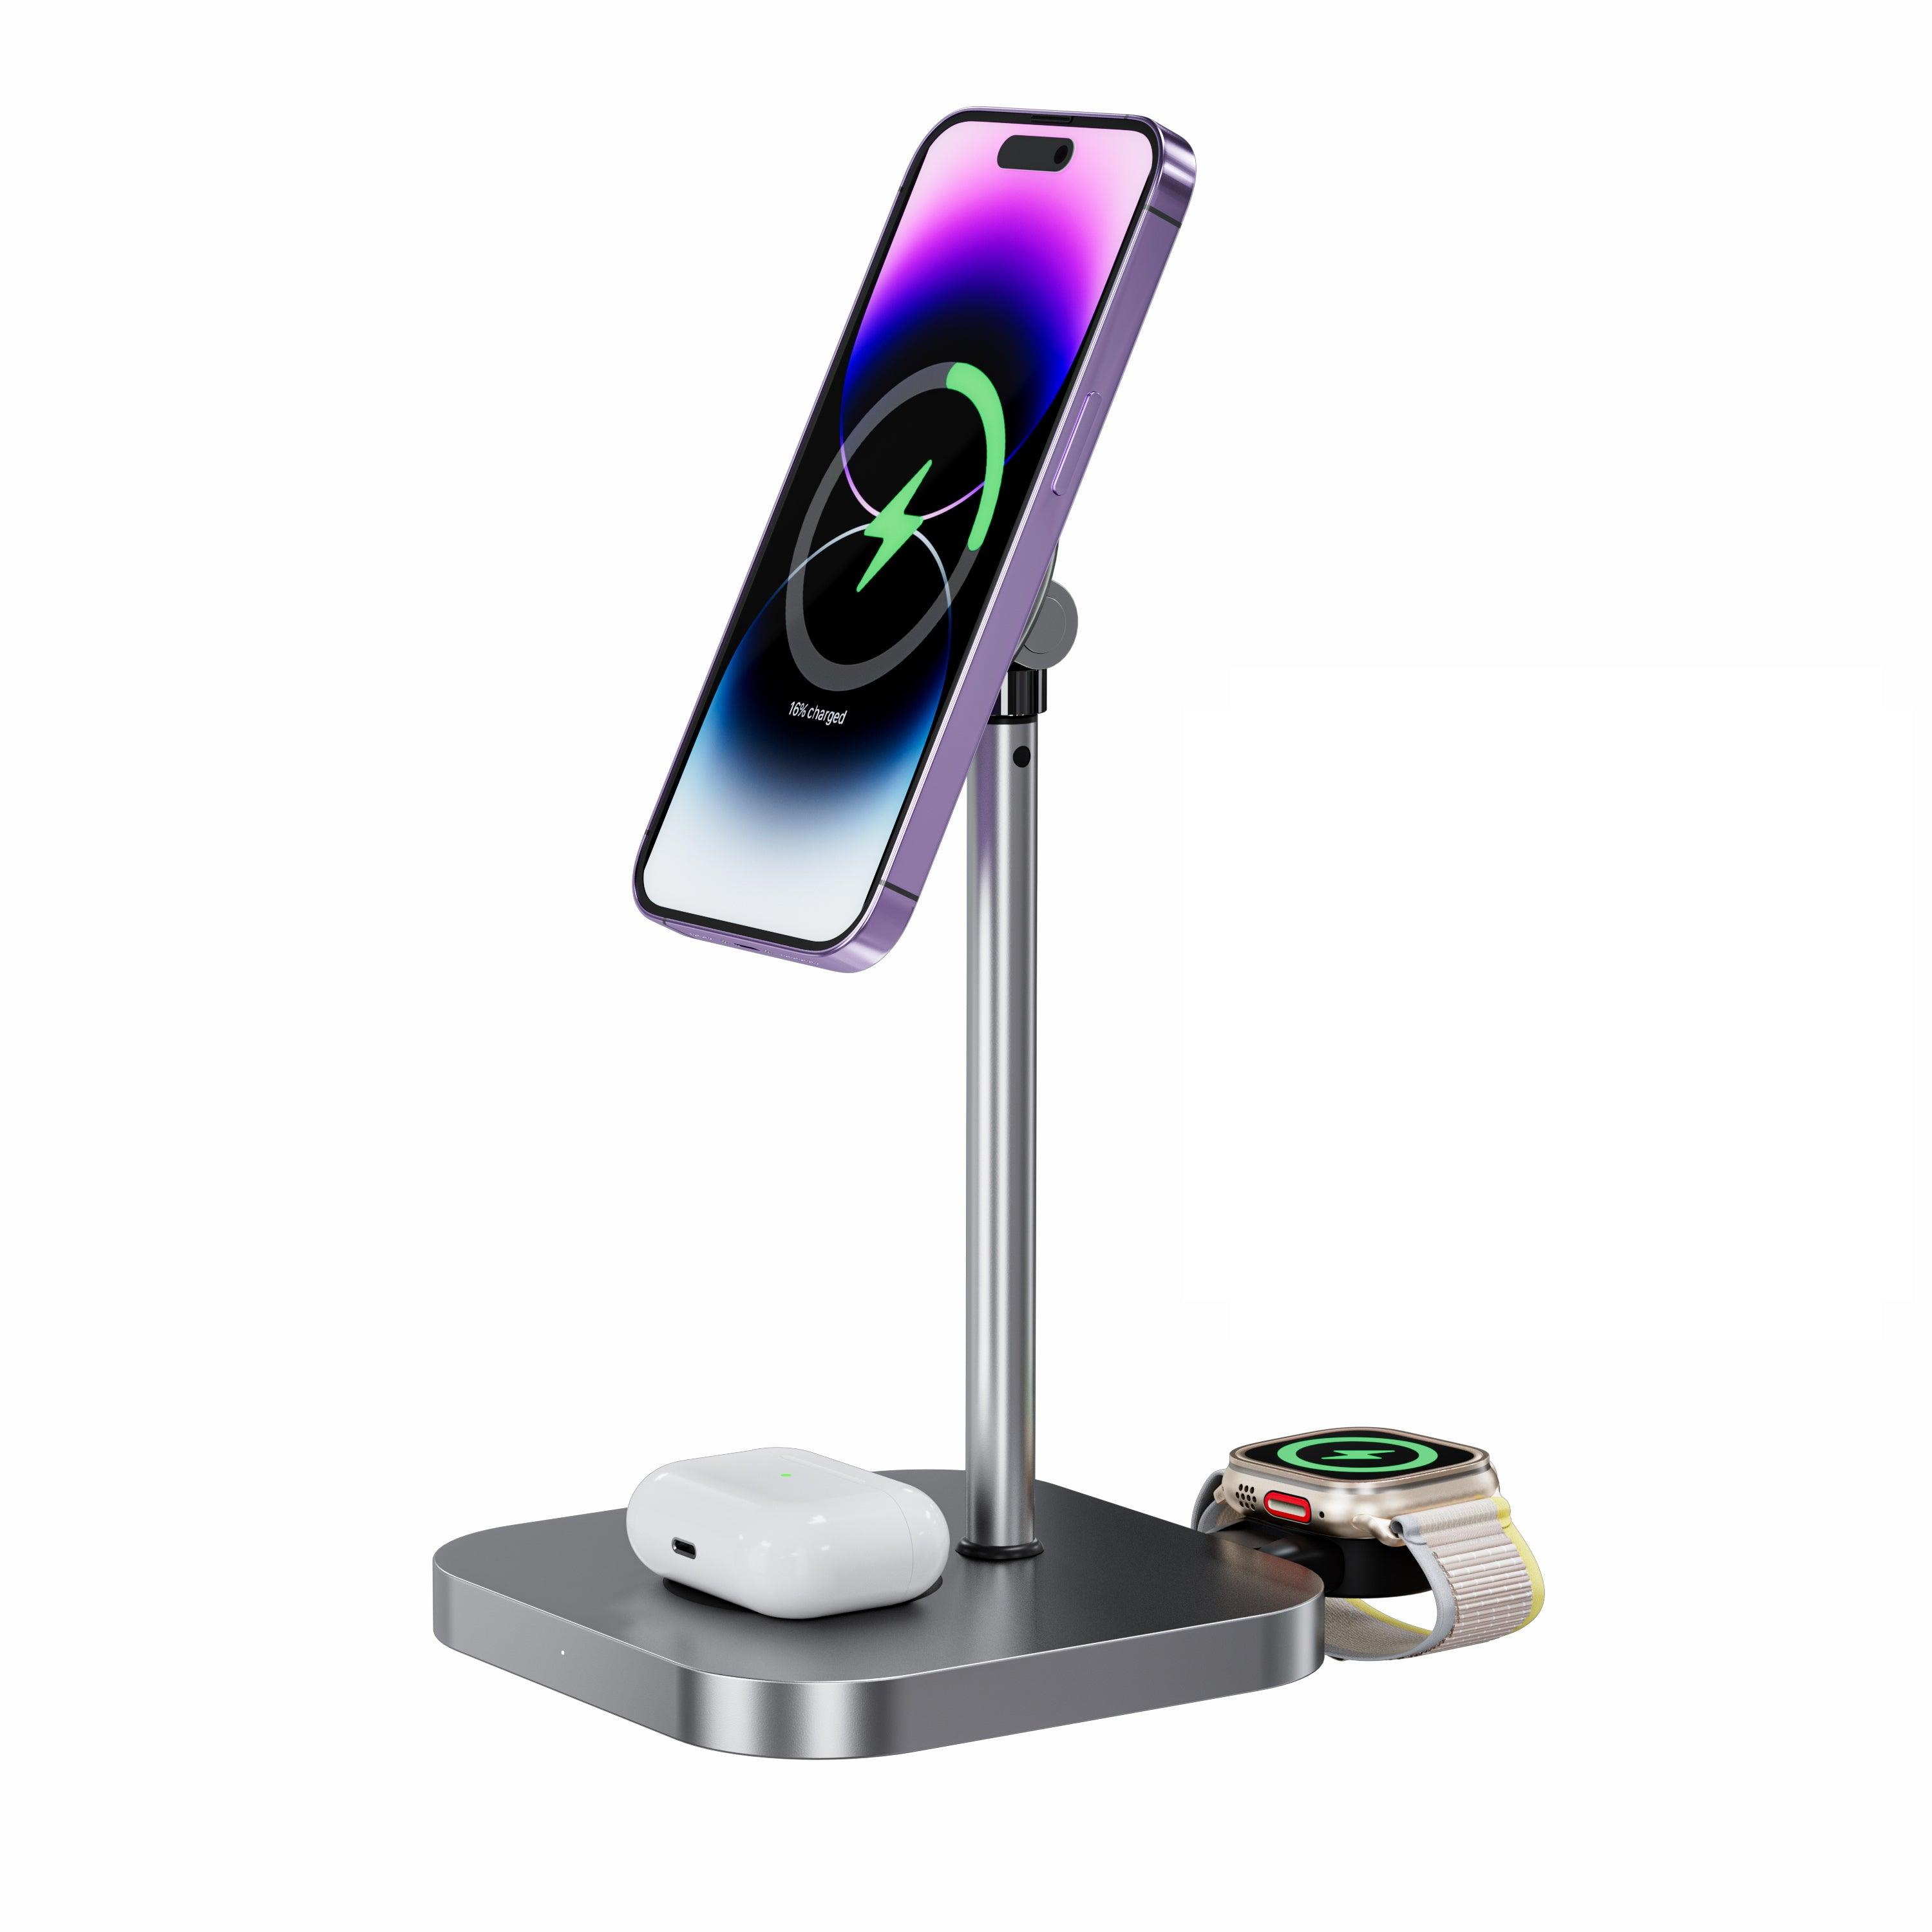 INVZI Portable Magnetic Fast Wireless Charger for Apple Watch 5W MFi Certified with USB-C Port - INVZI